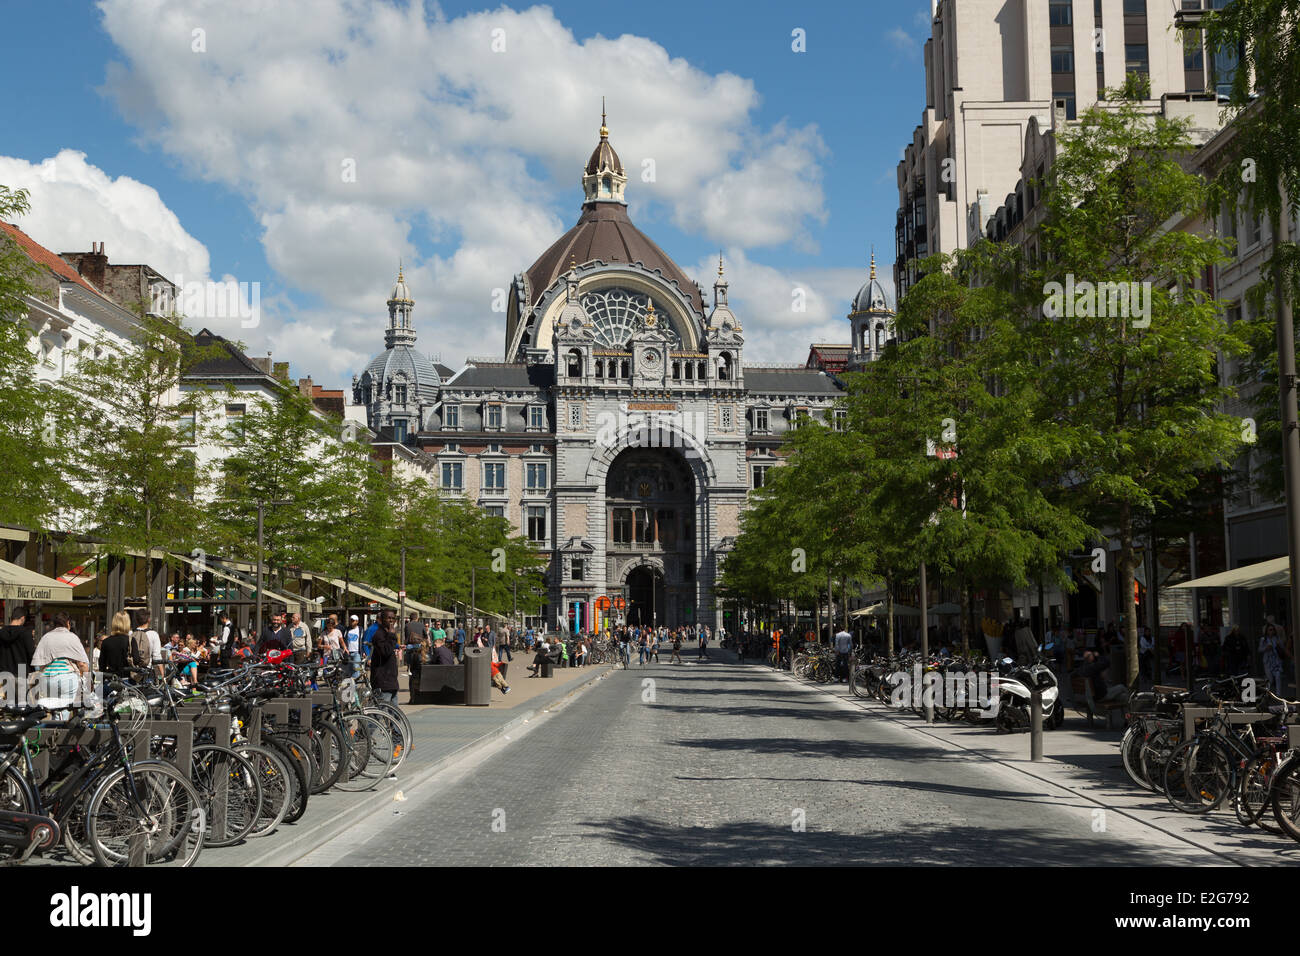 A photograph of the main train station in Antwerp, Belgium. Stock Photo